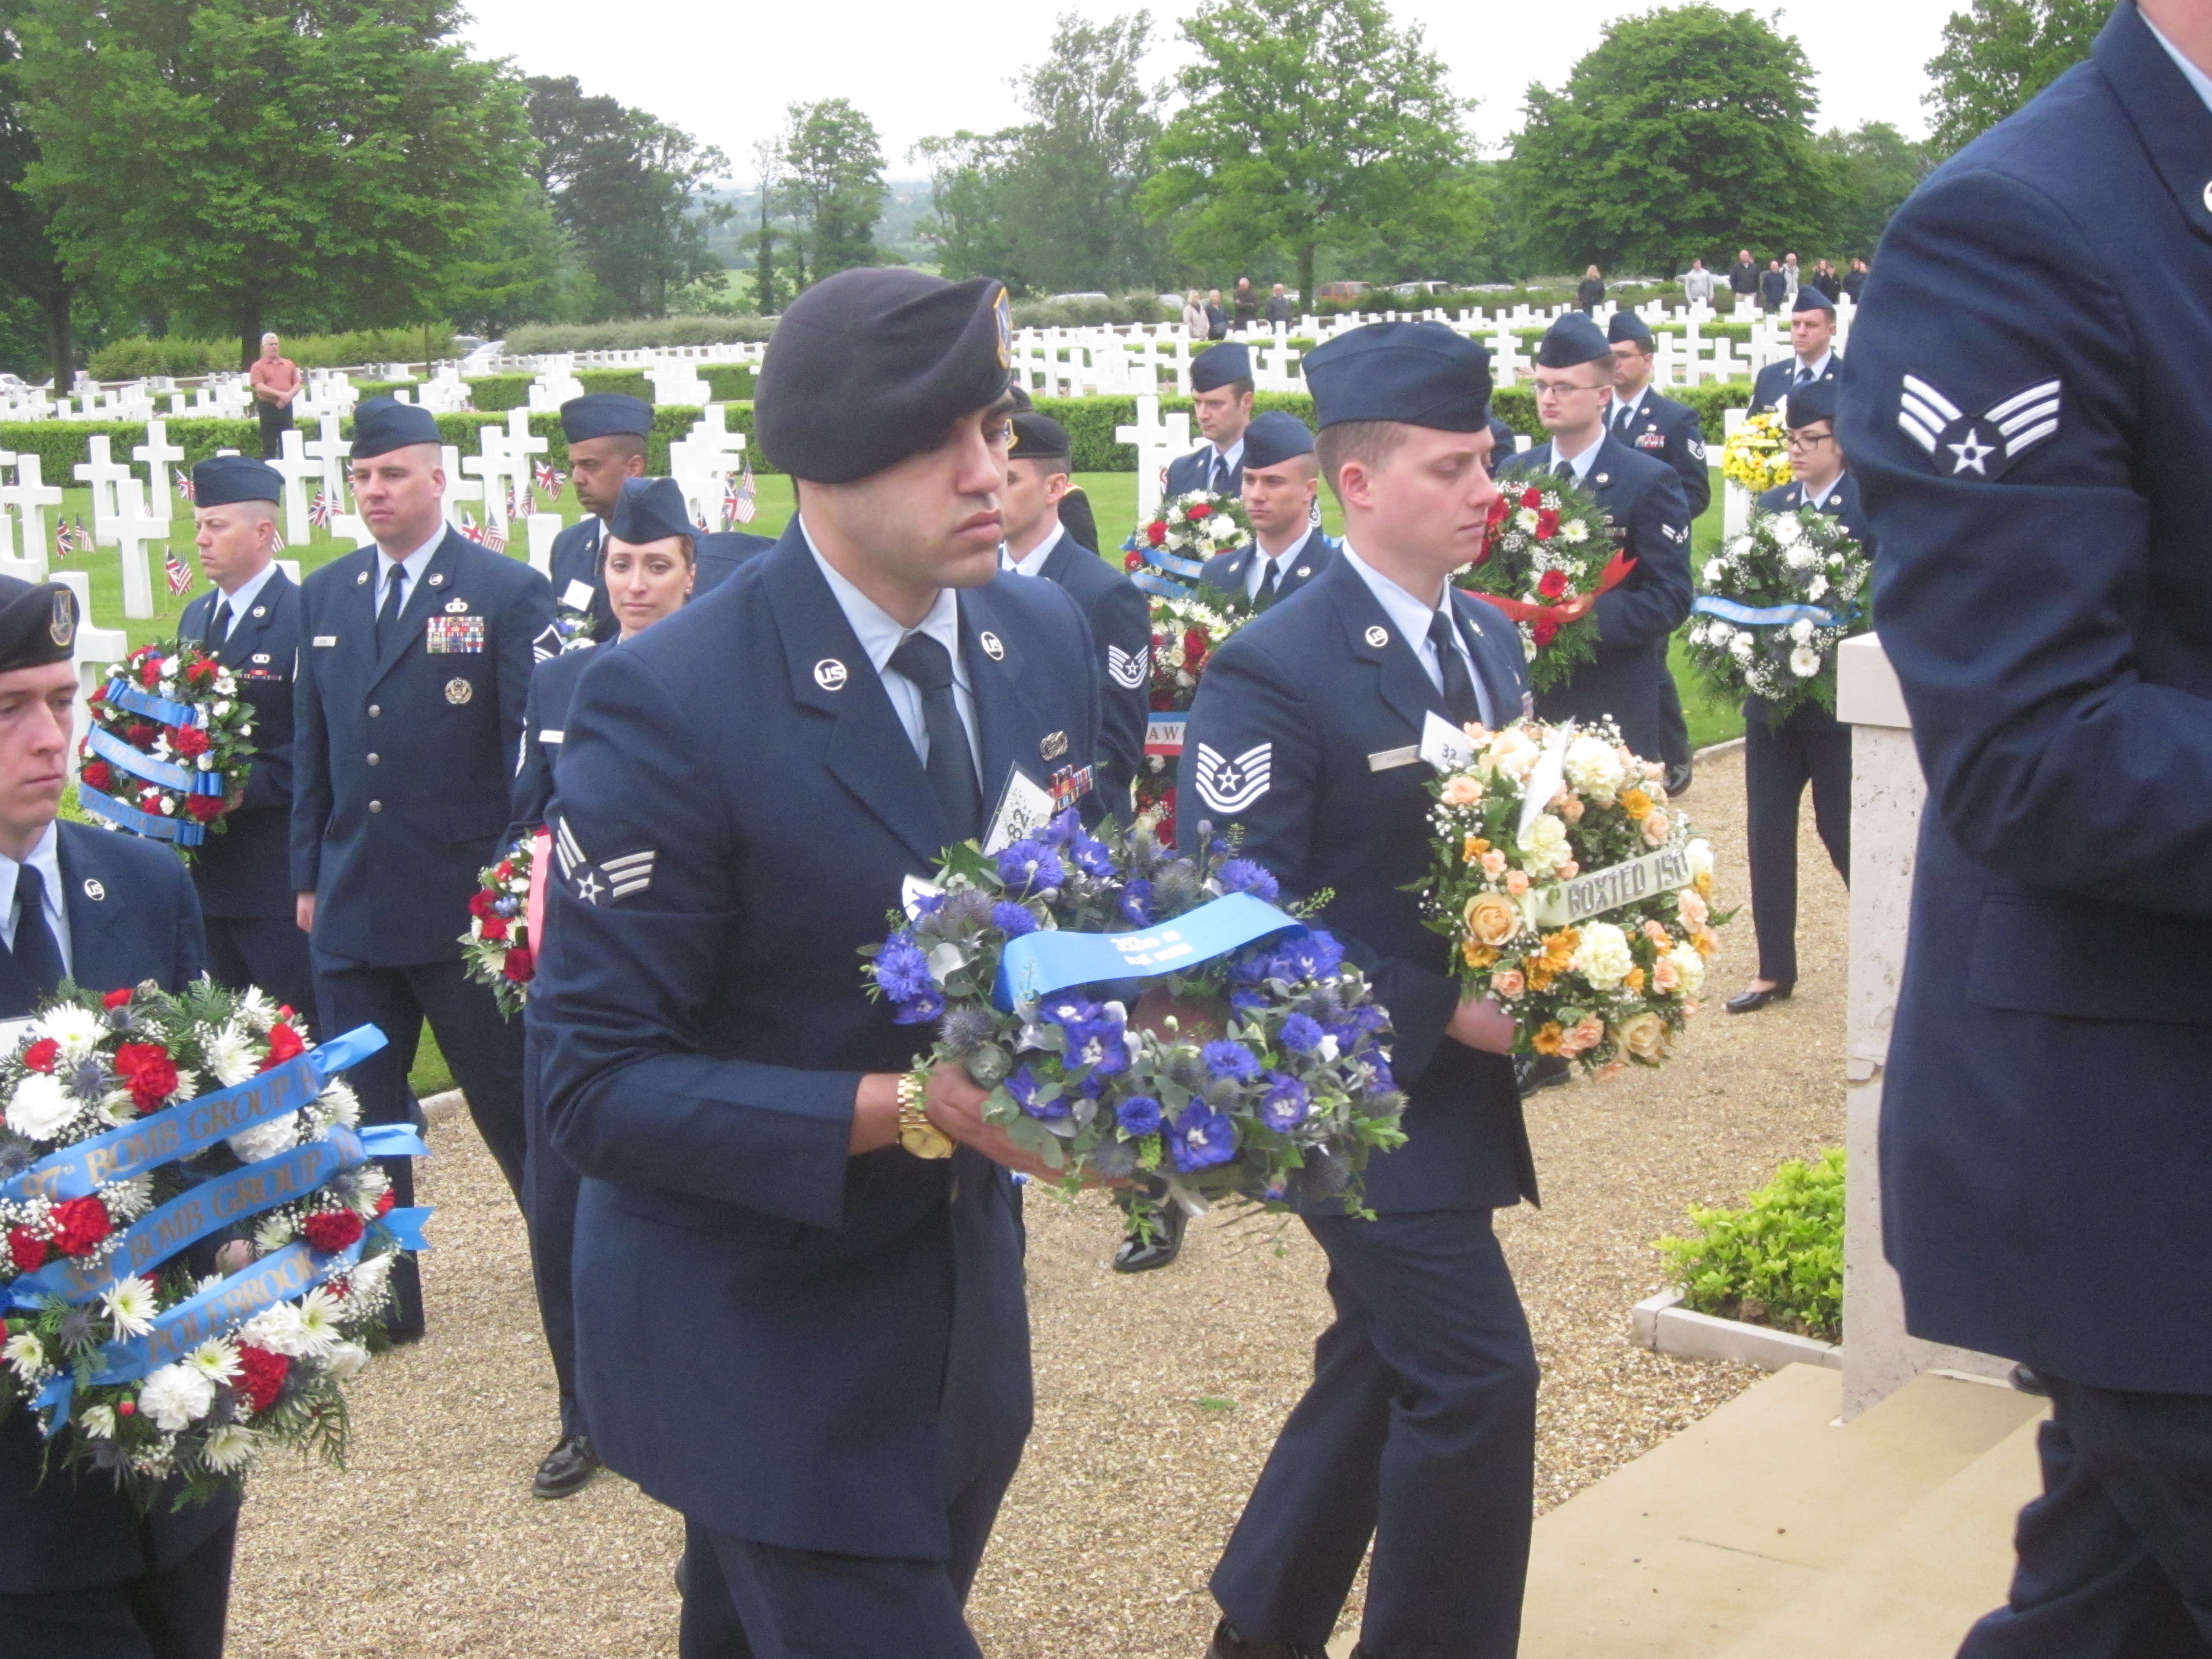 Members of the Air Force walk with small floral wreaths.